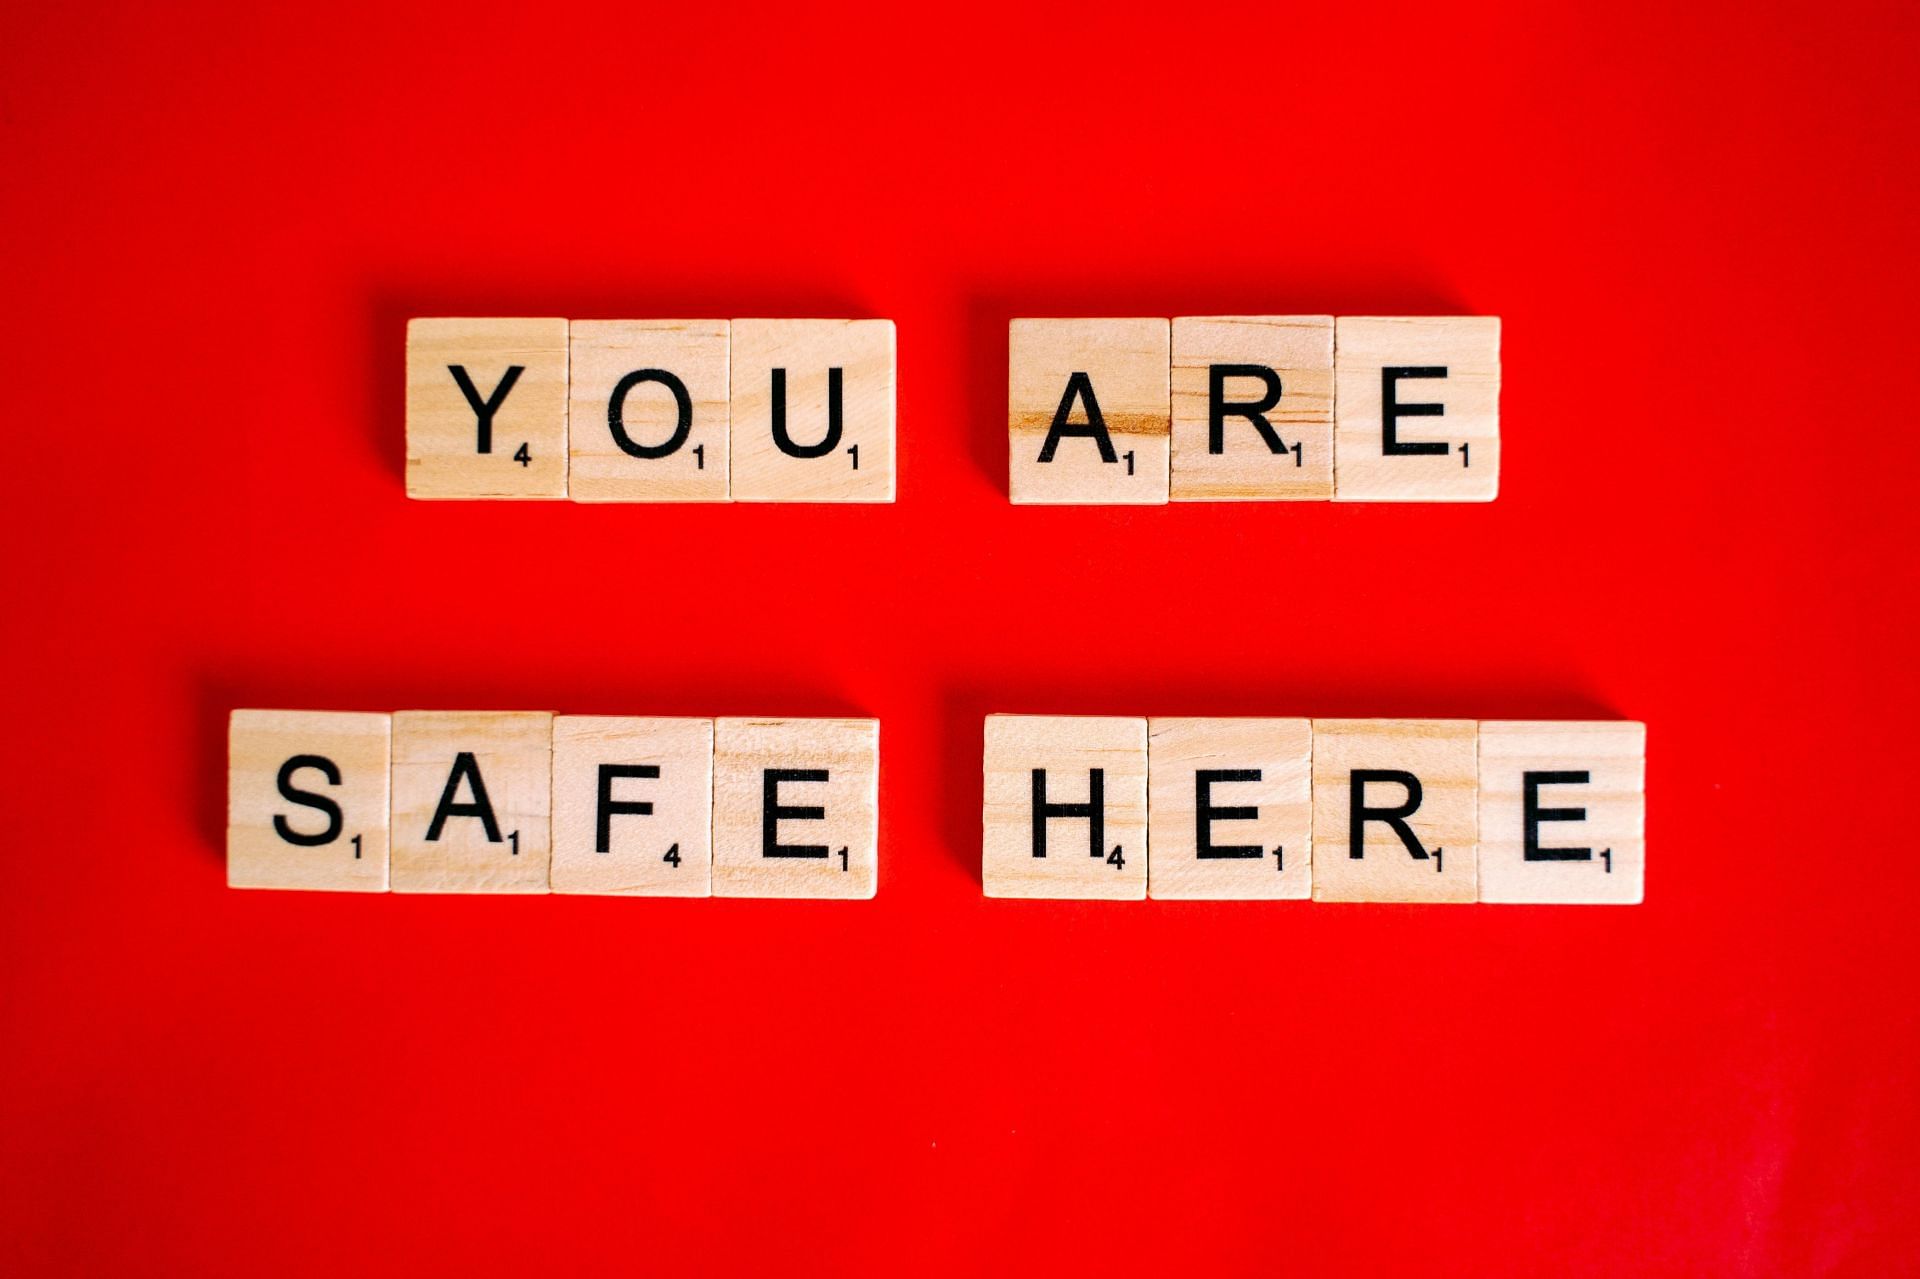 You are safe in this space, even if you have been diagnosed with the worst mental illness. (Image via Pexels/ Anna)